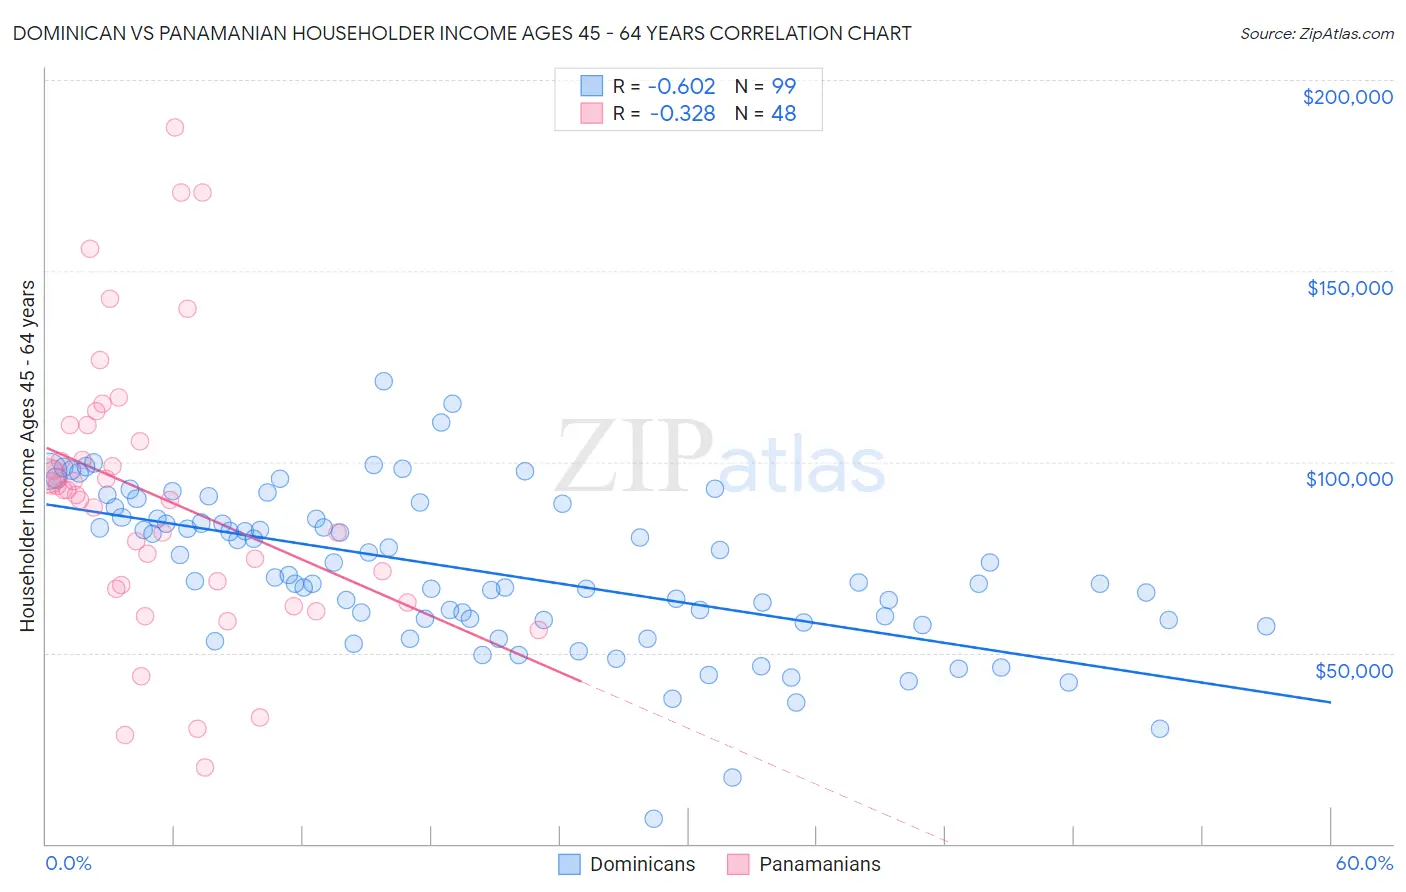 Dominican vs Panamanian Householder Income Ages 45 - 64 years